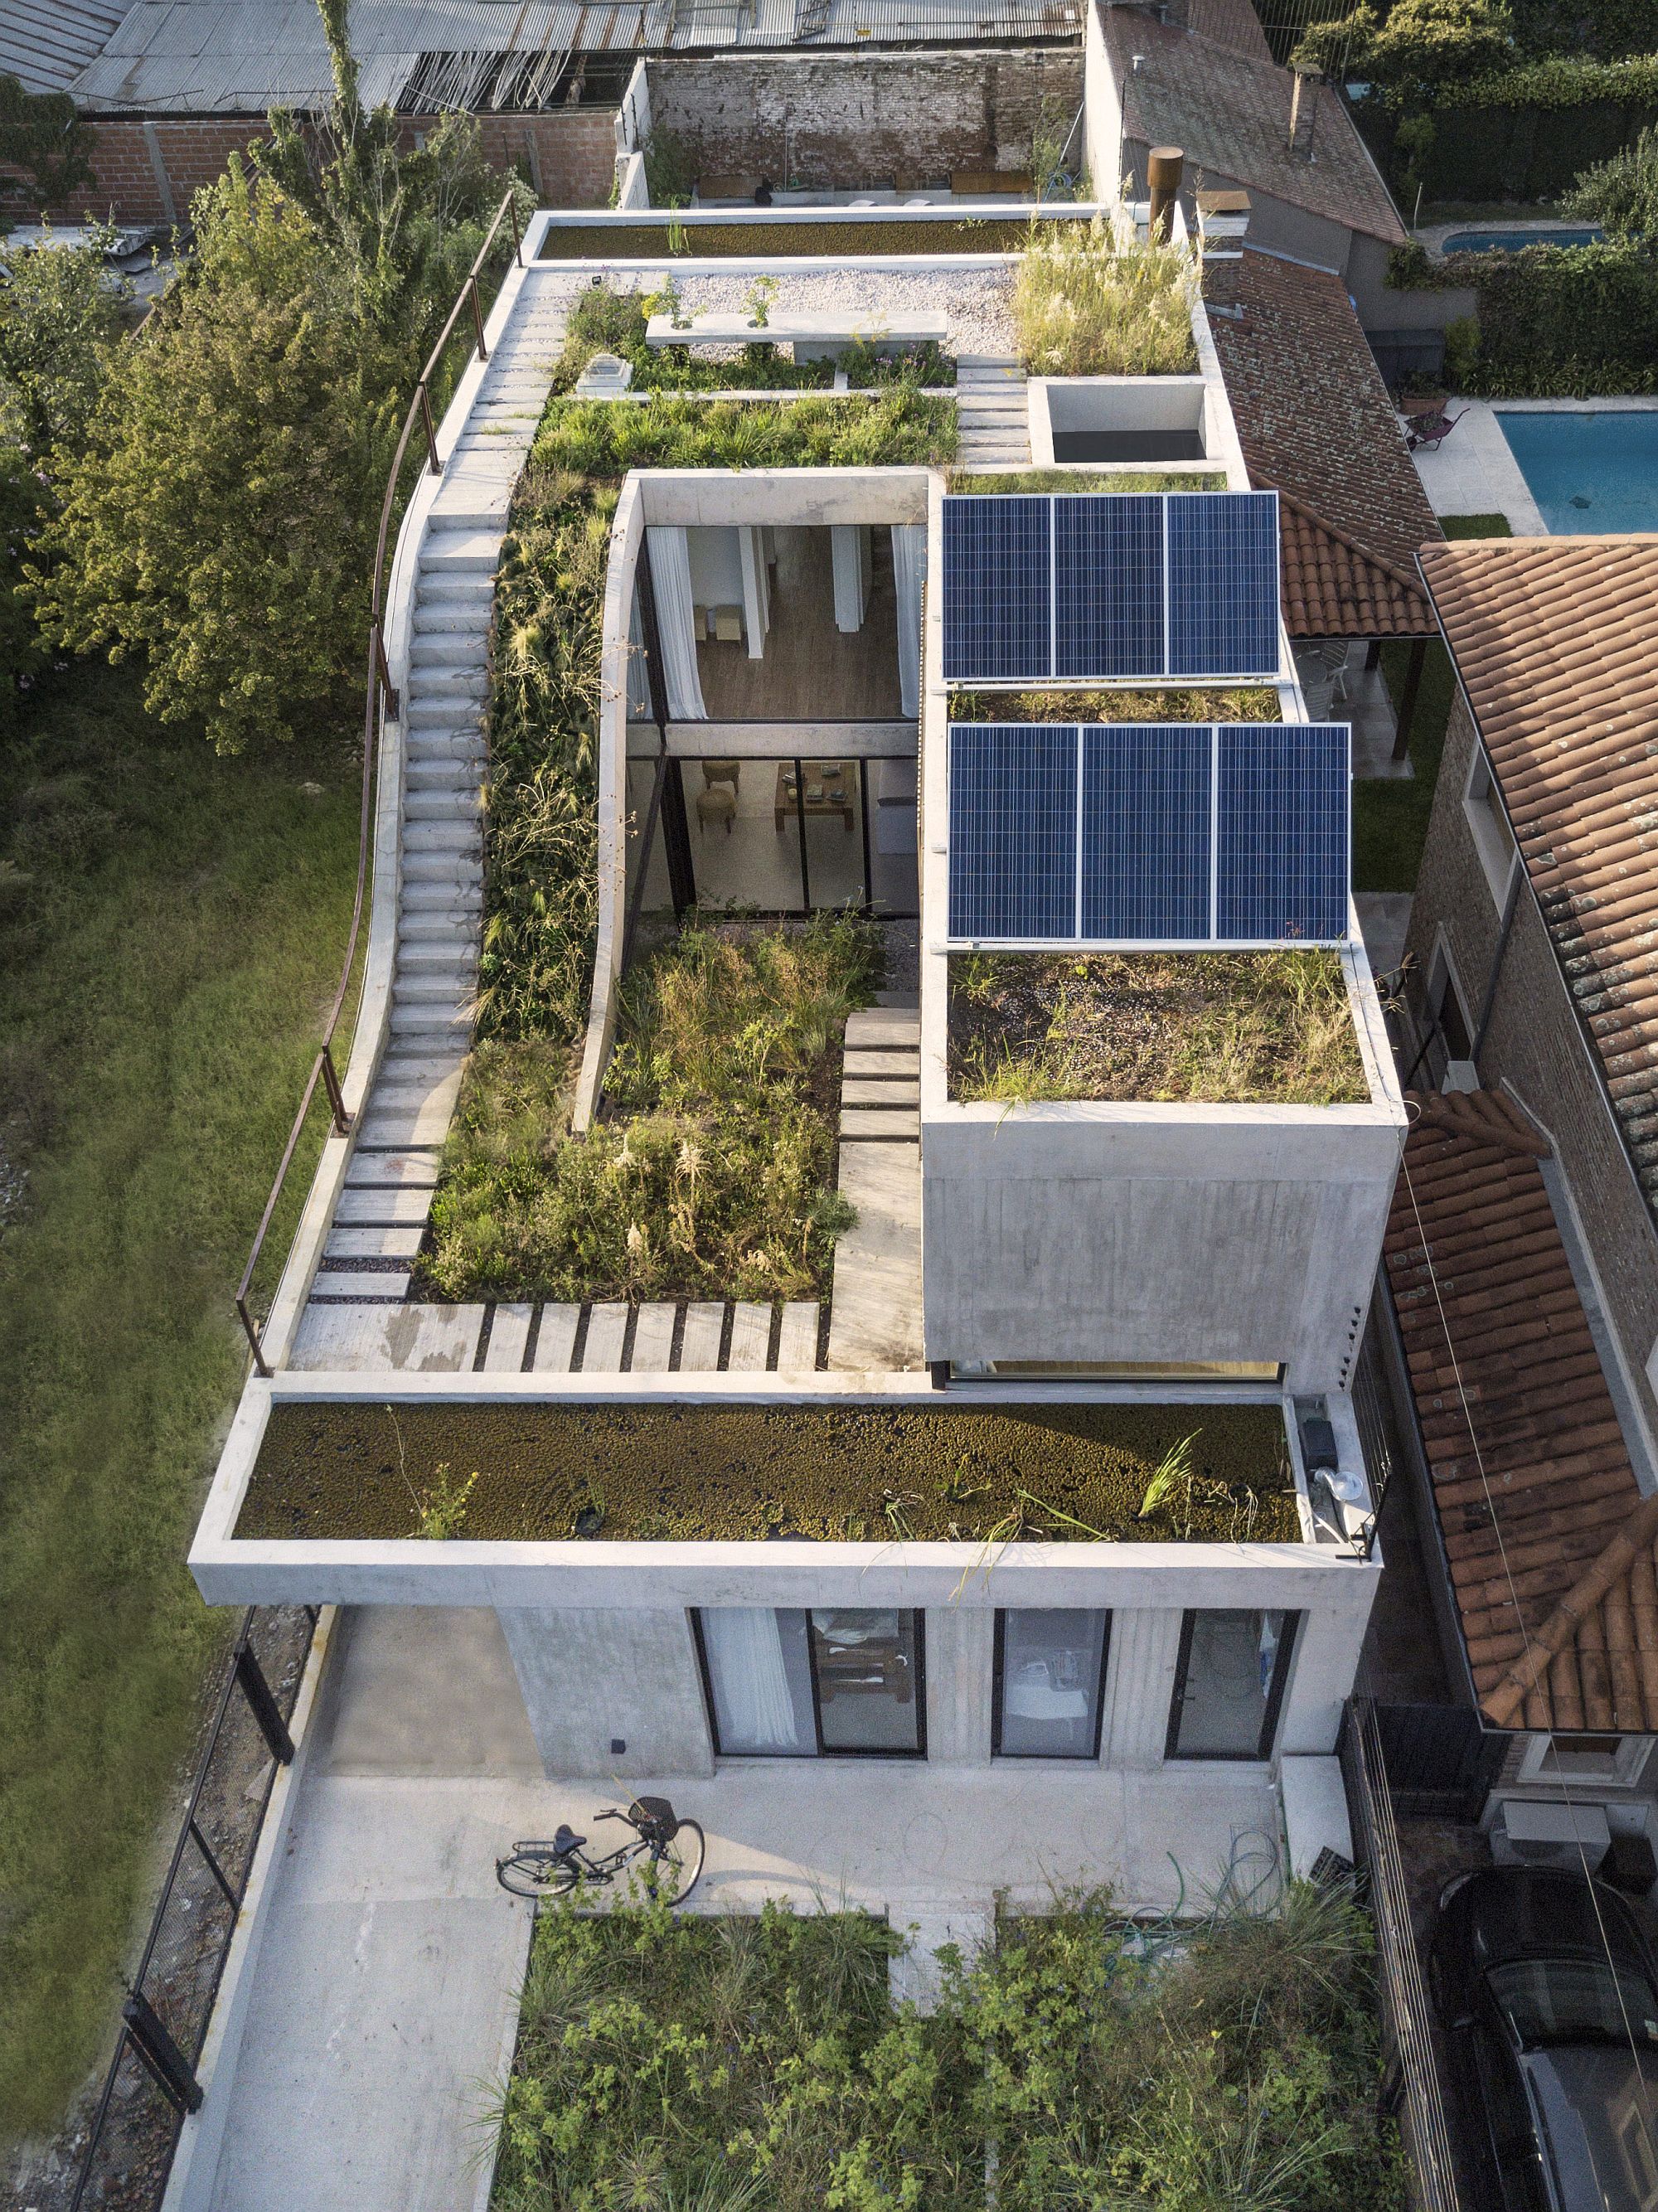 View from above of the eco-friendly and sustainable home in Beunos Aires